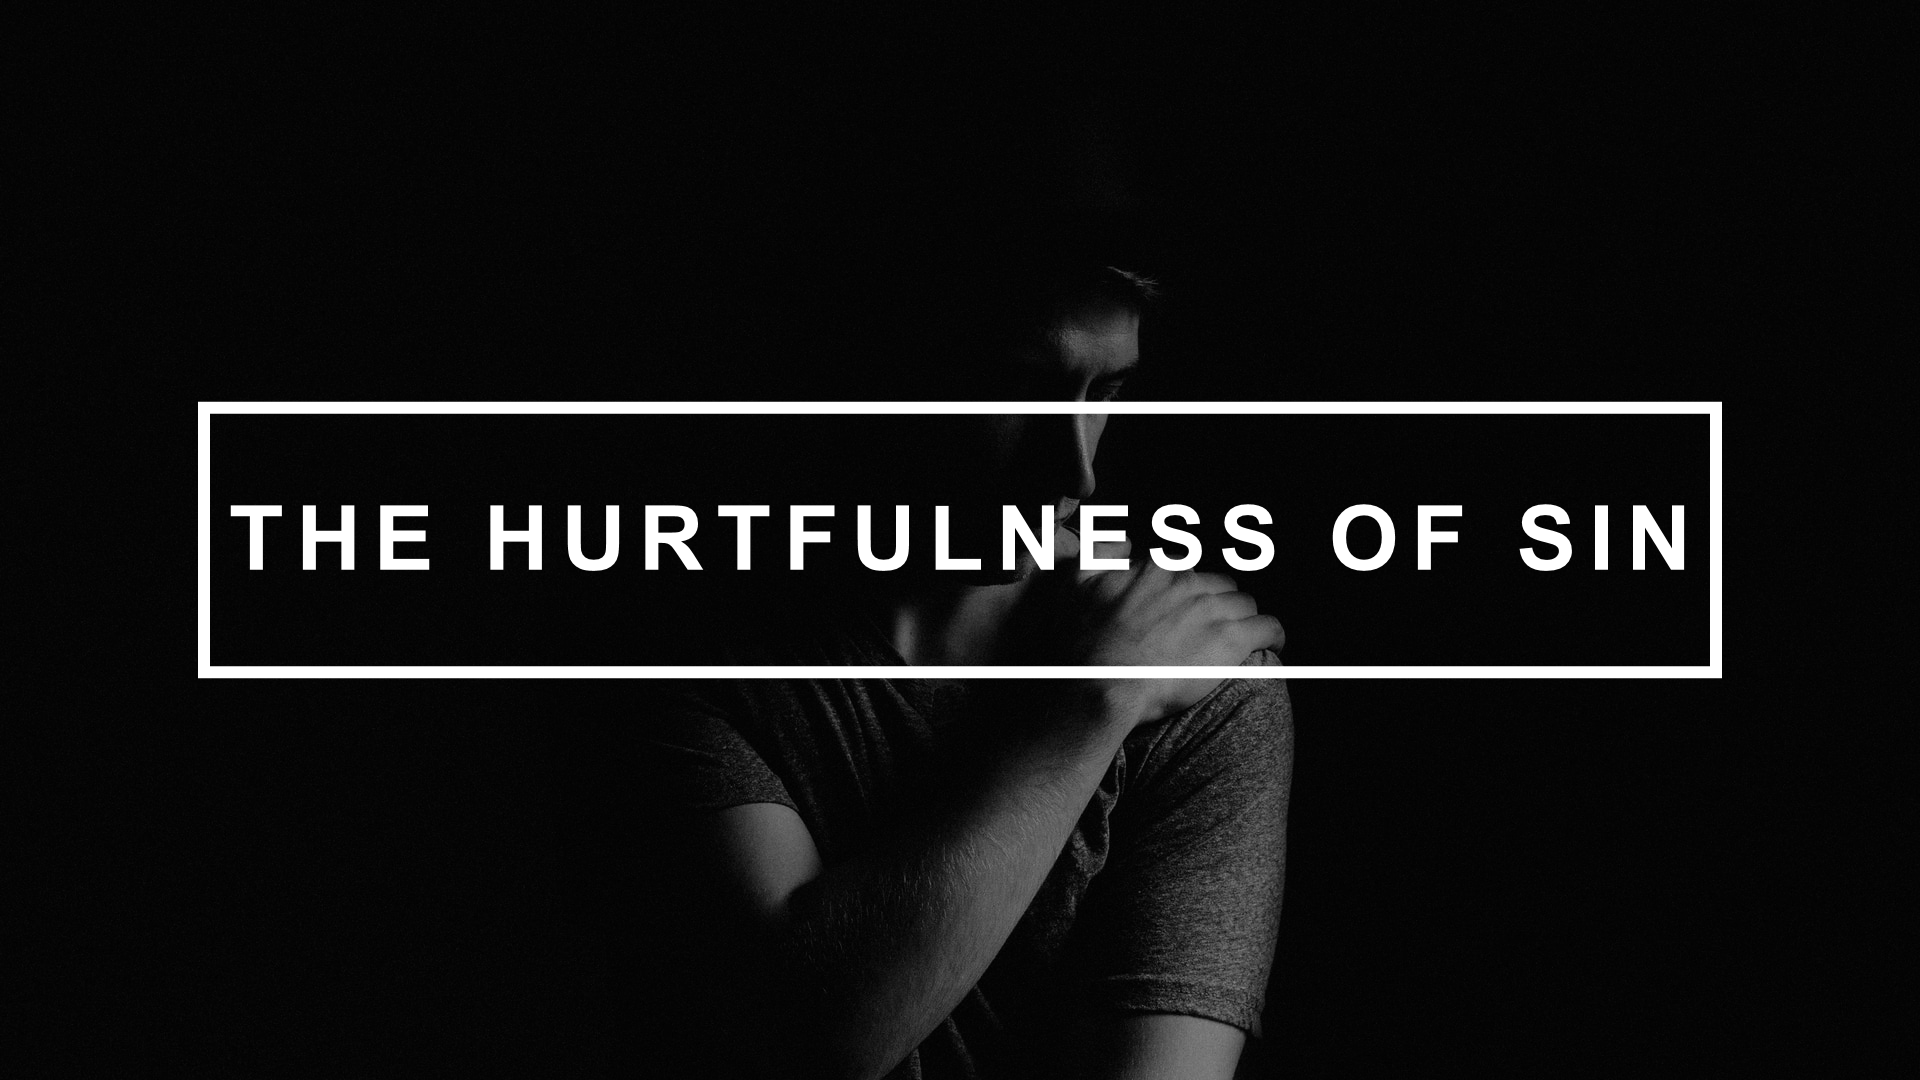 The Hurtfulness of Sin